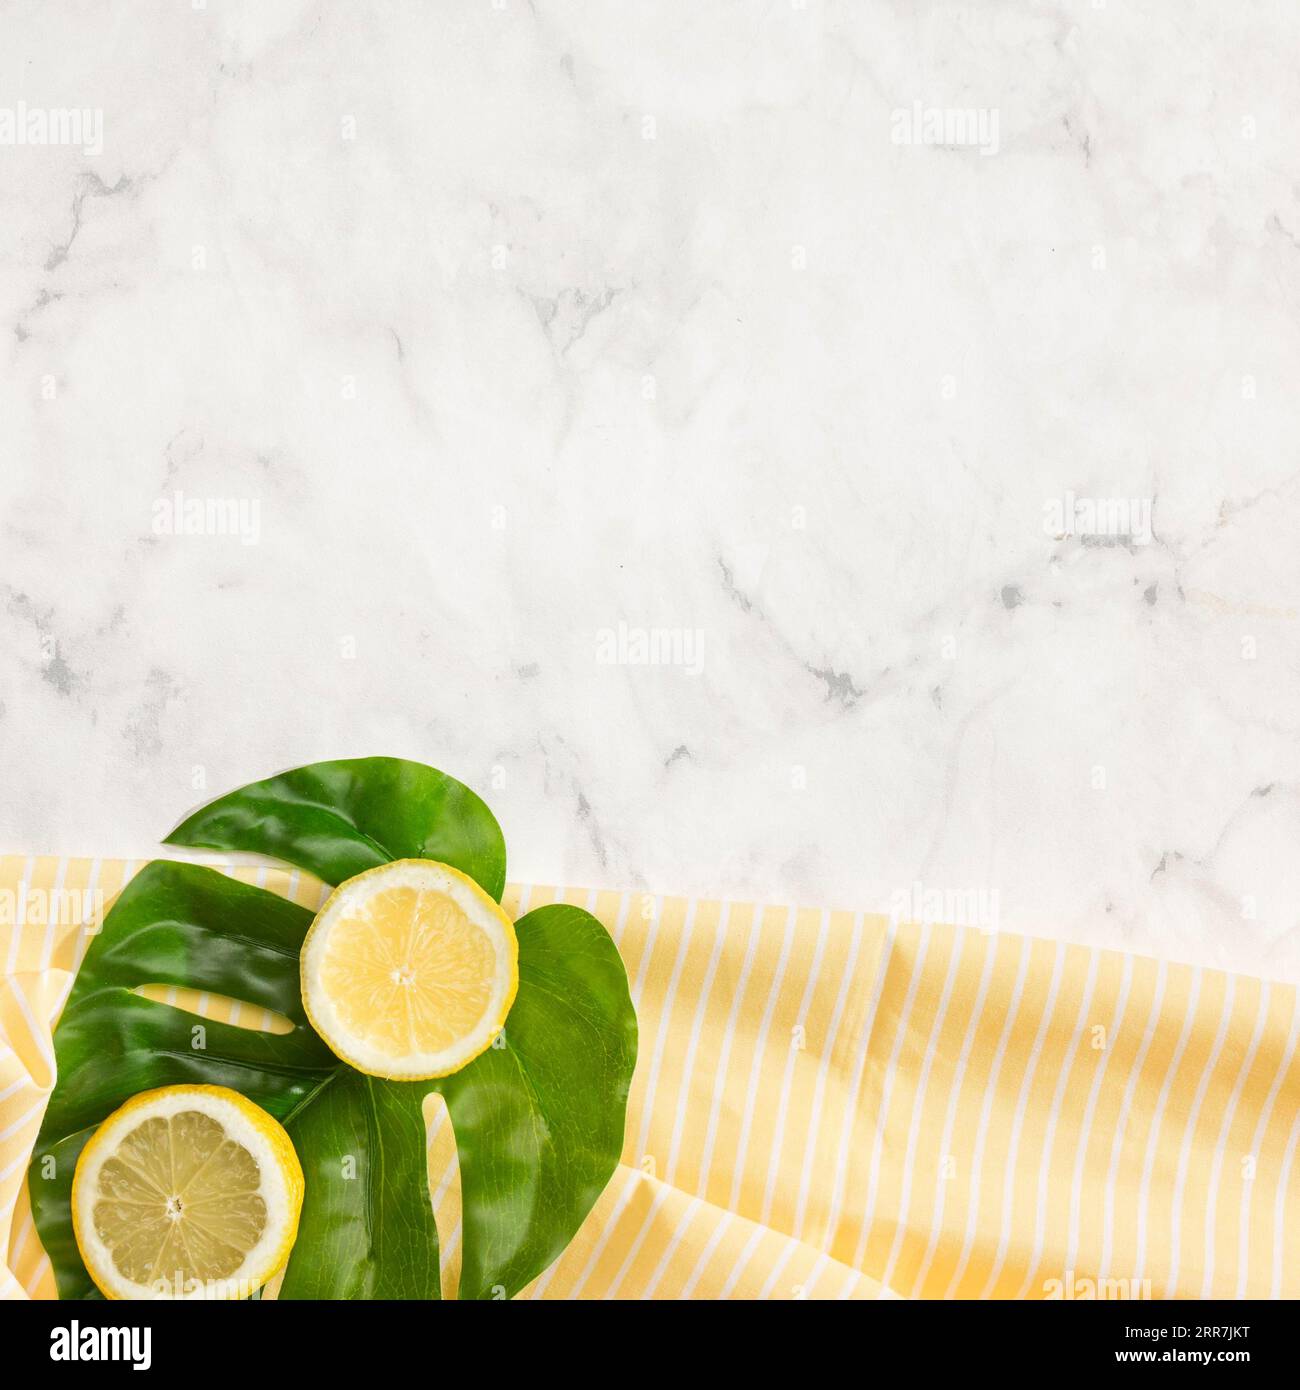 Lemon monstera leaf with copy space Stock Photo